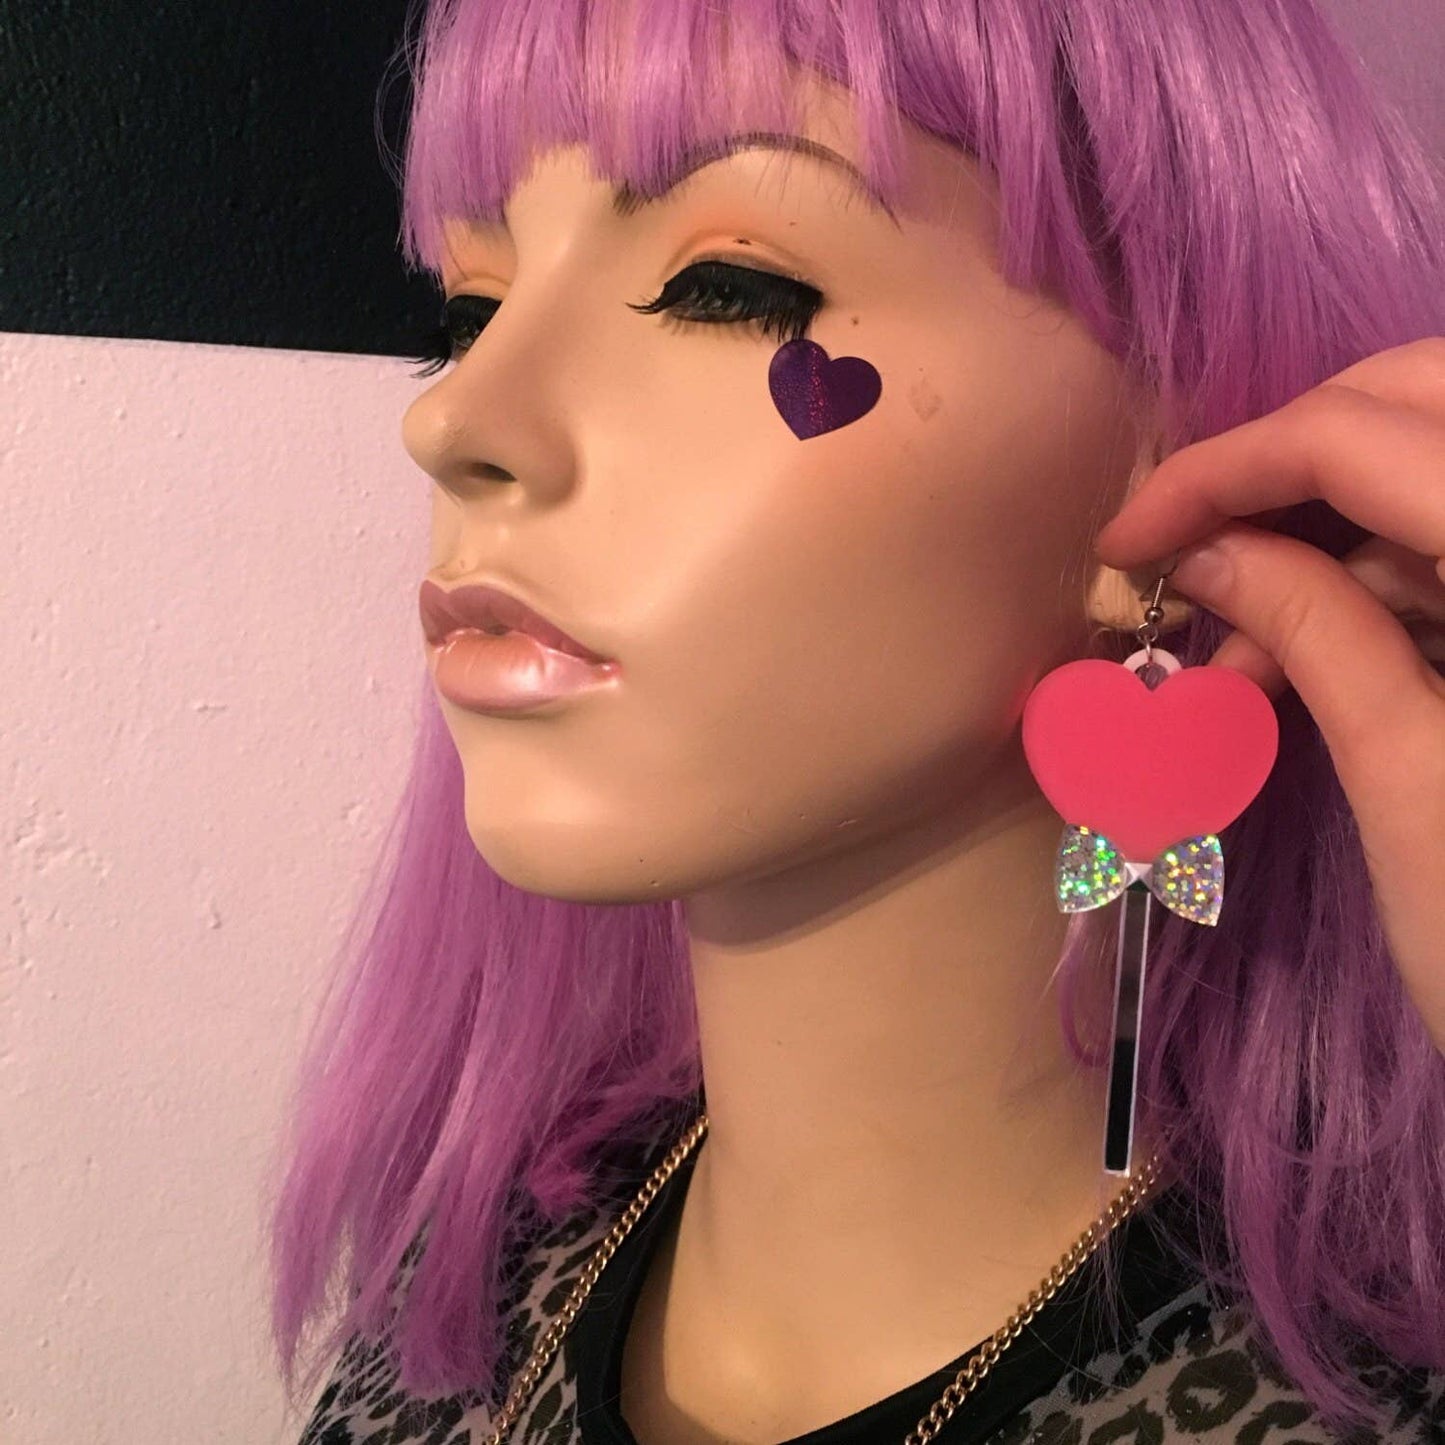 I'm Your Present - Lollipop Hearts Candy Earrings, Pink